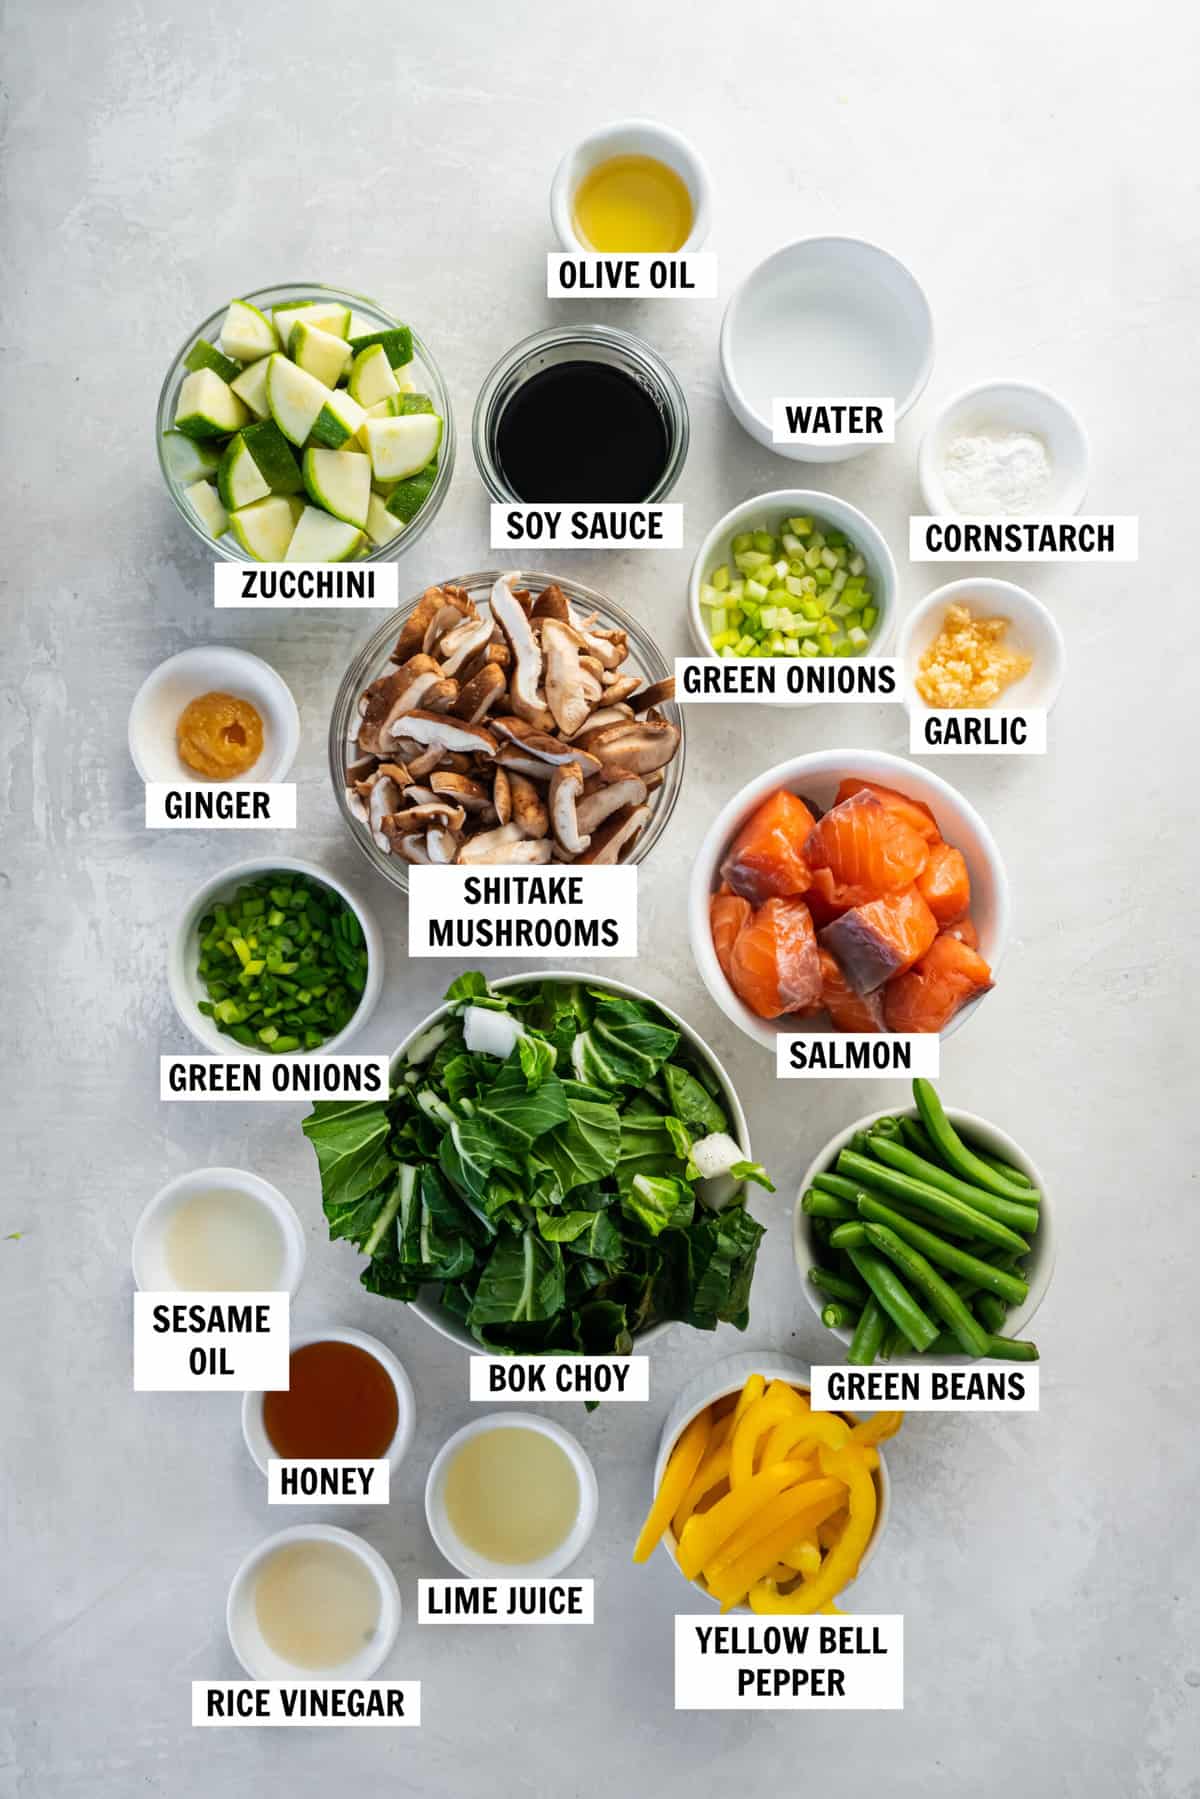 All of the ingredients for the salmon stir fry and teriyaki sauce are on a white countertop.